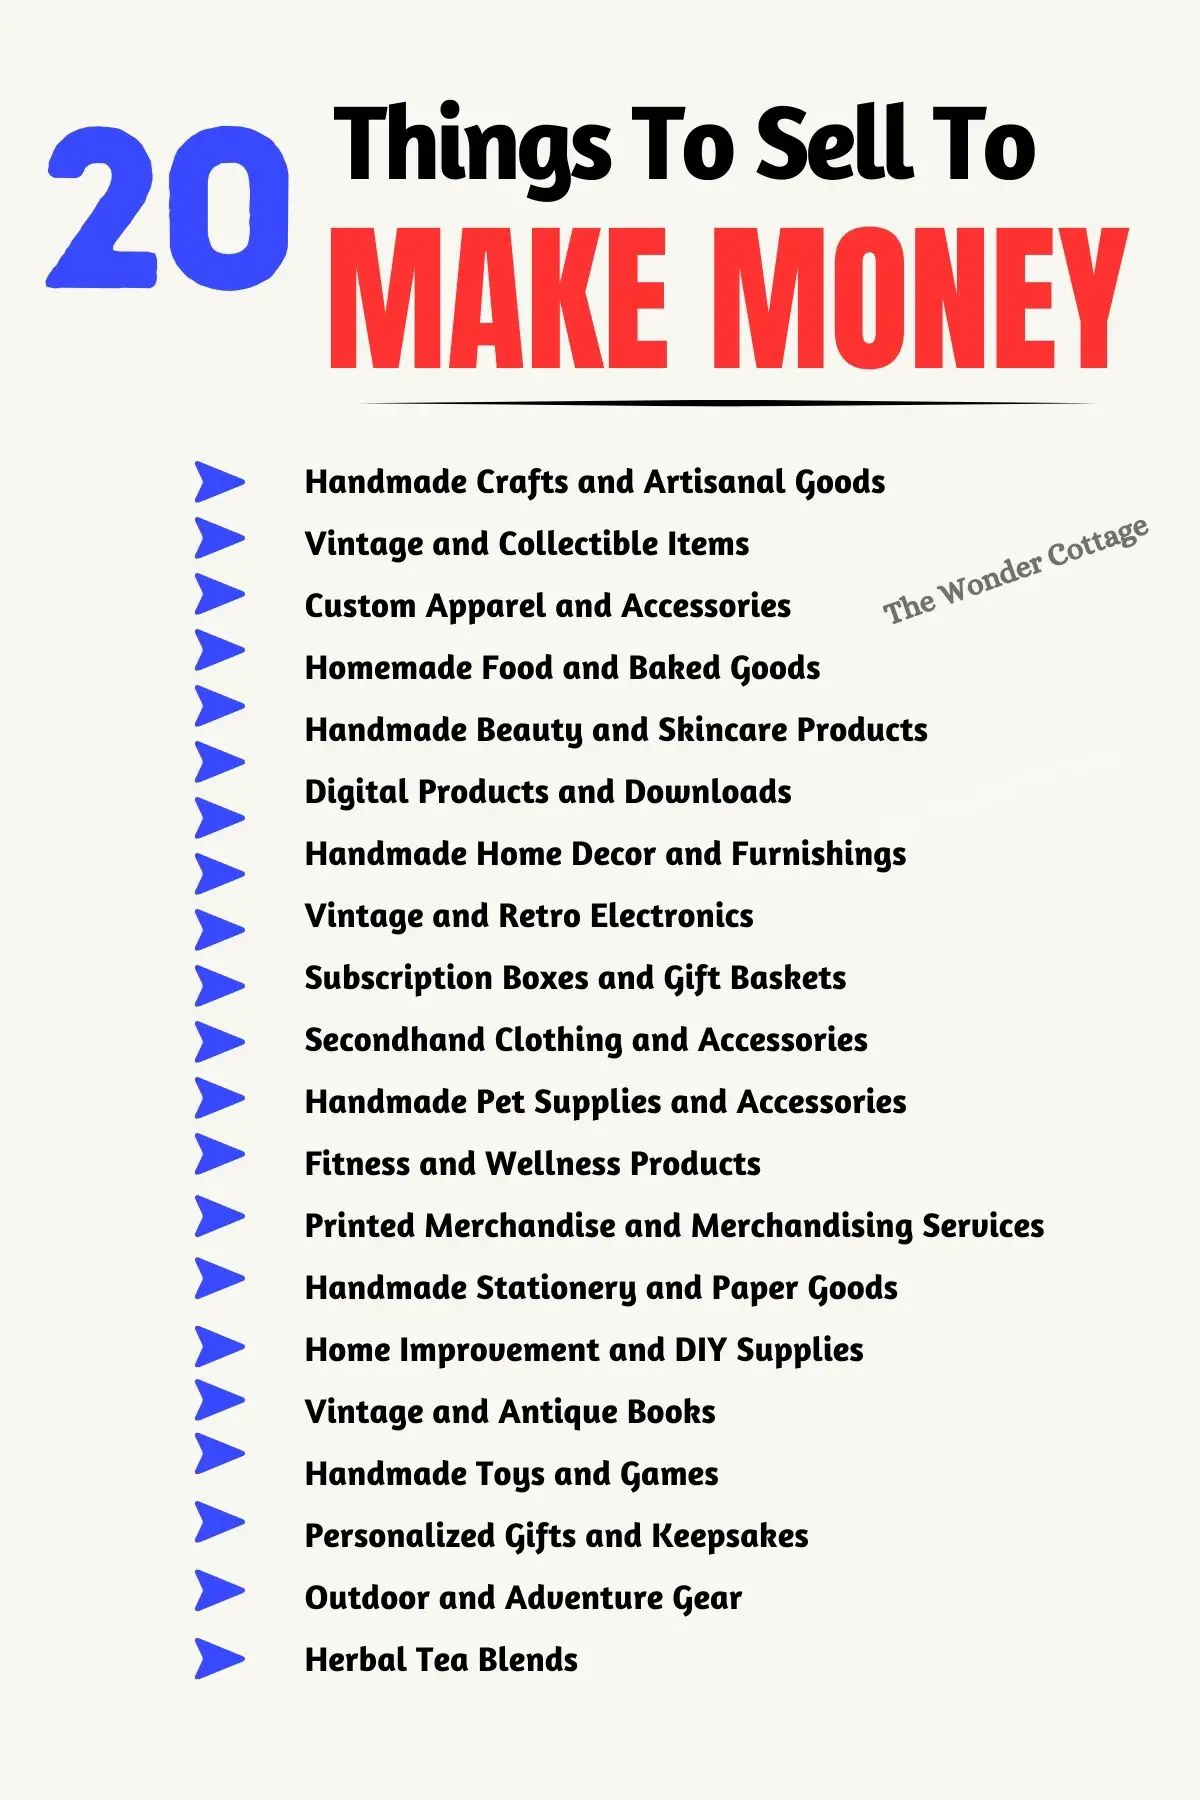  Things To Sell To Make Money